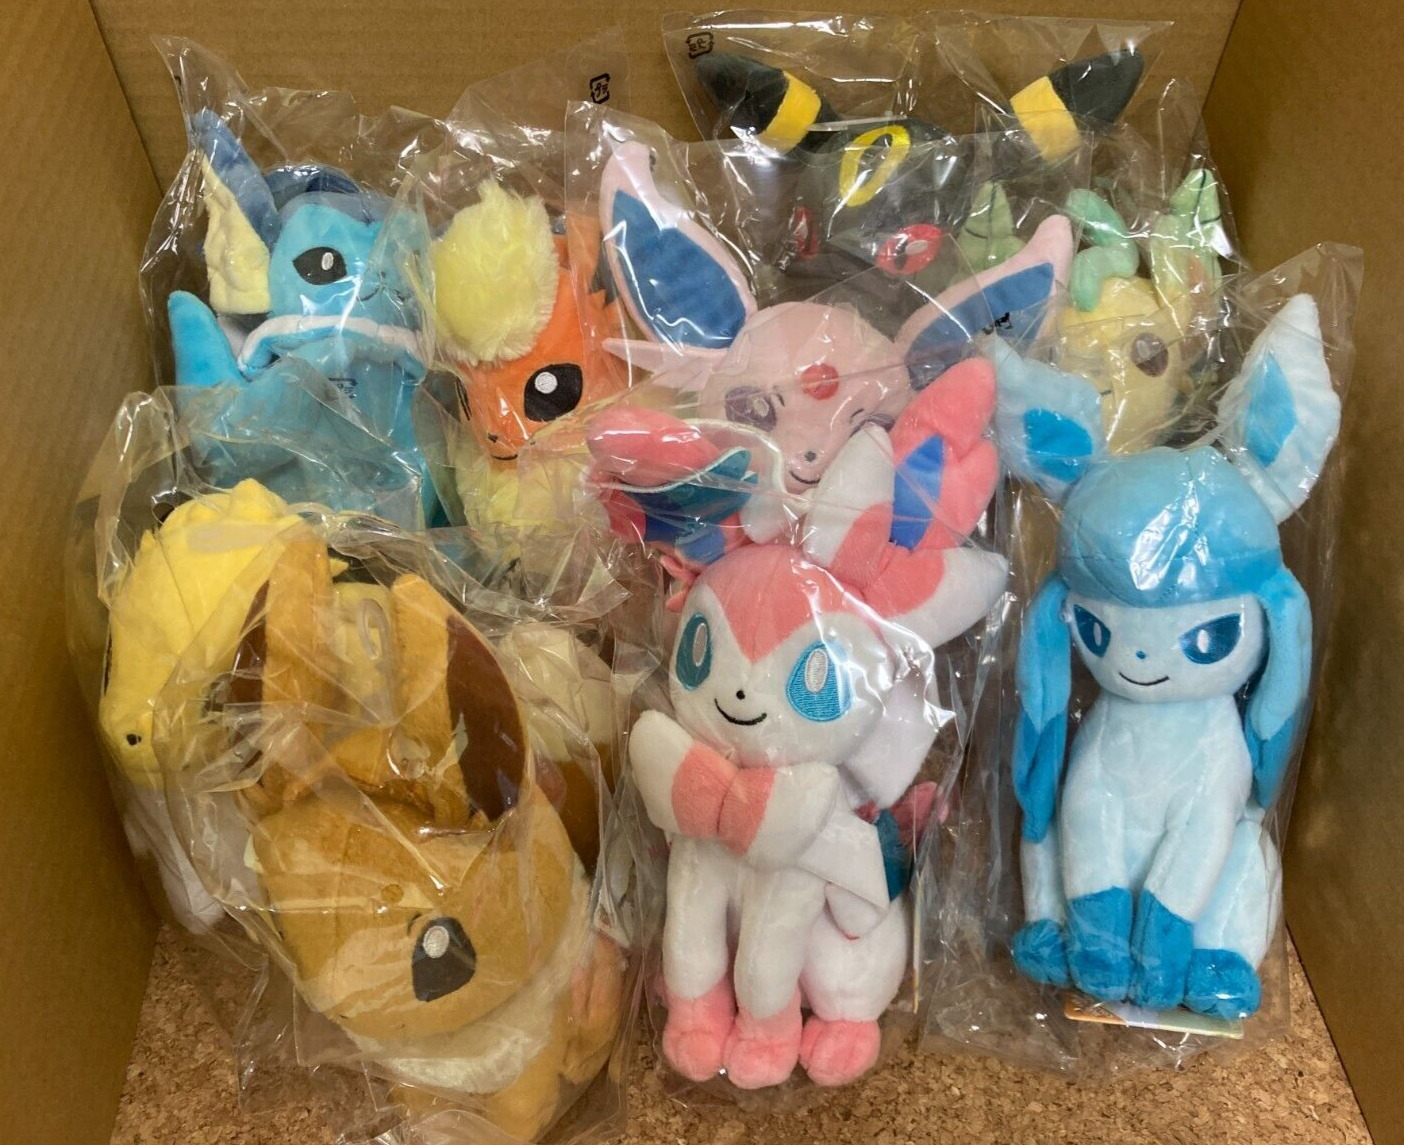 Sanei Pokemon ALL STAR COLLECTION Eeveelutions Plush Toy Set of 9 Japan